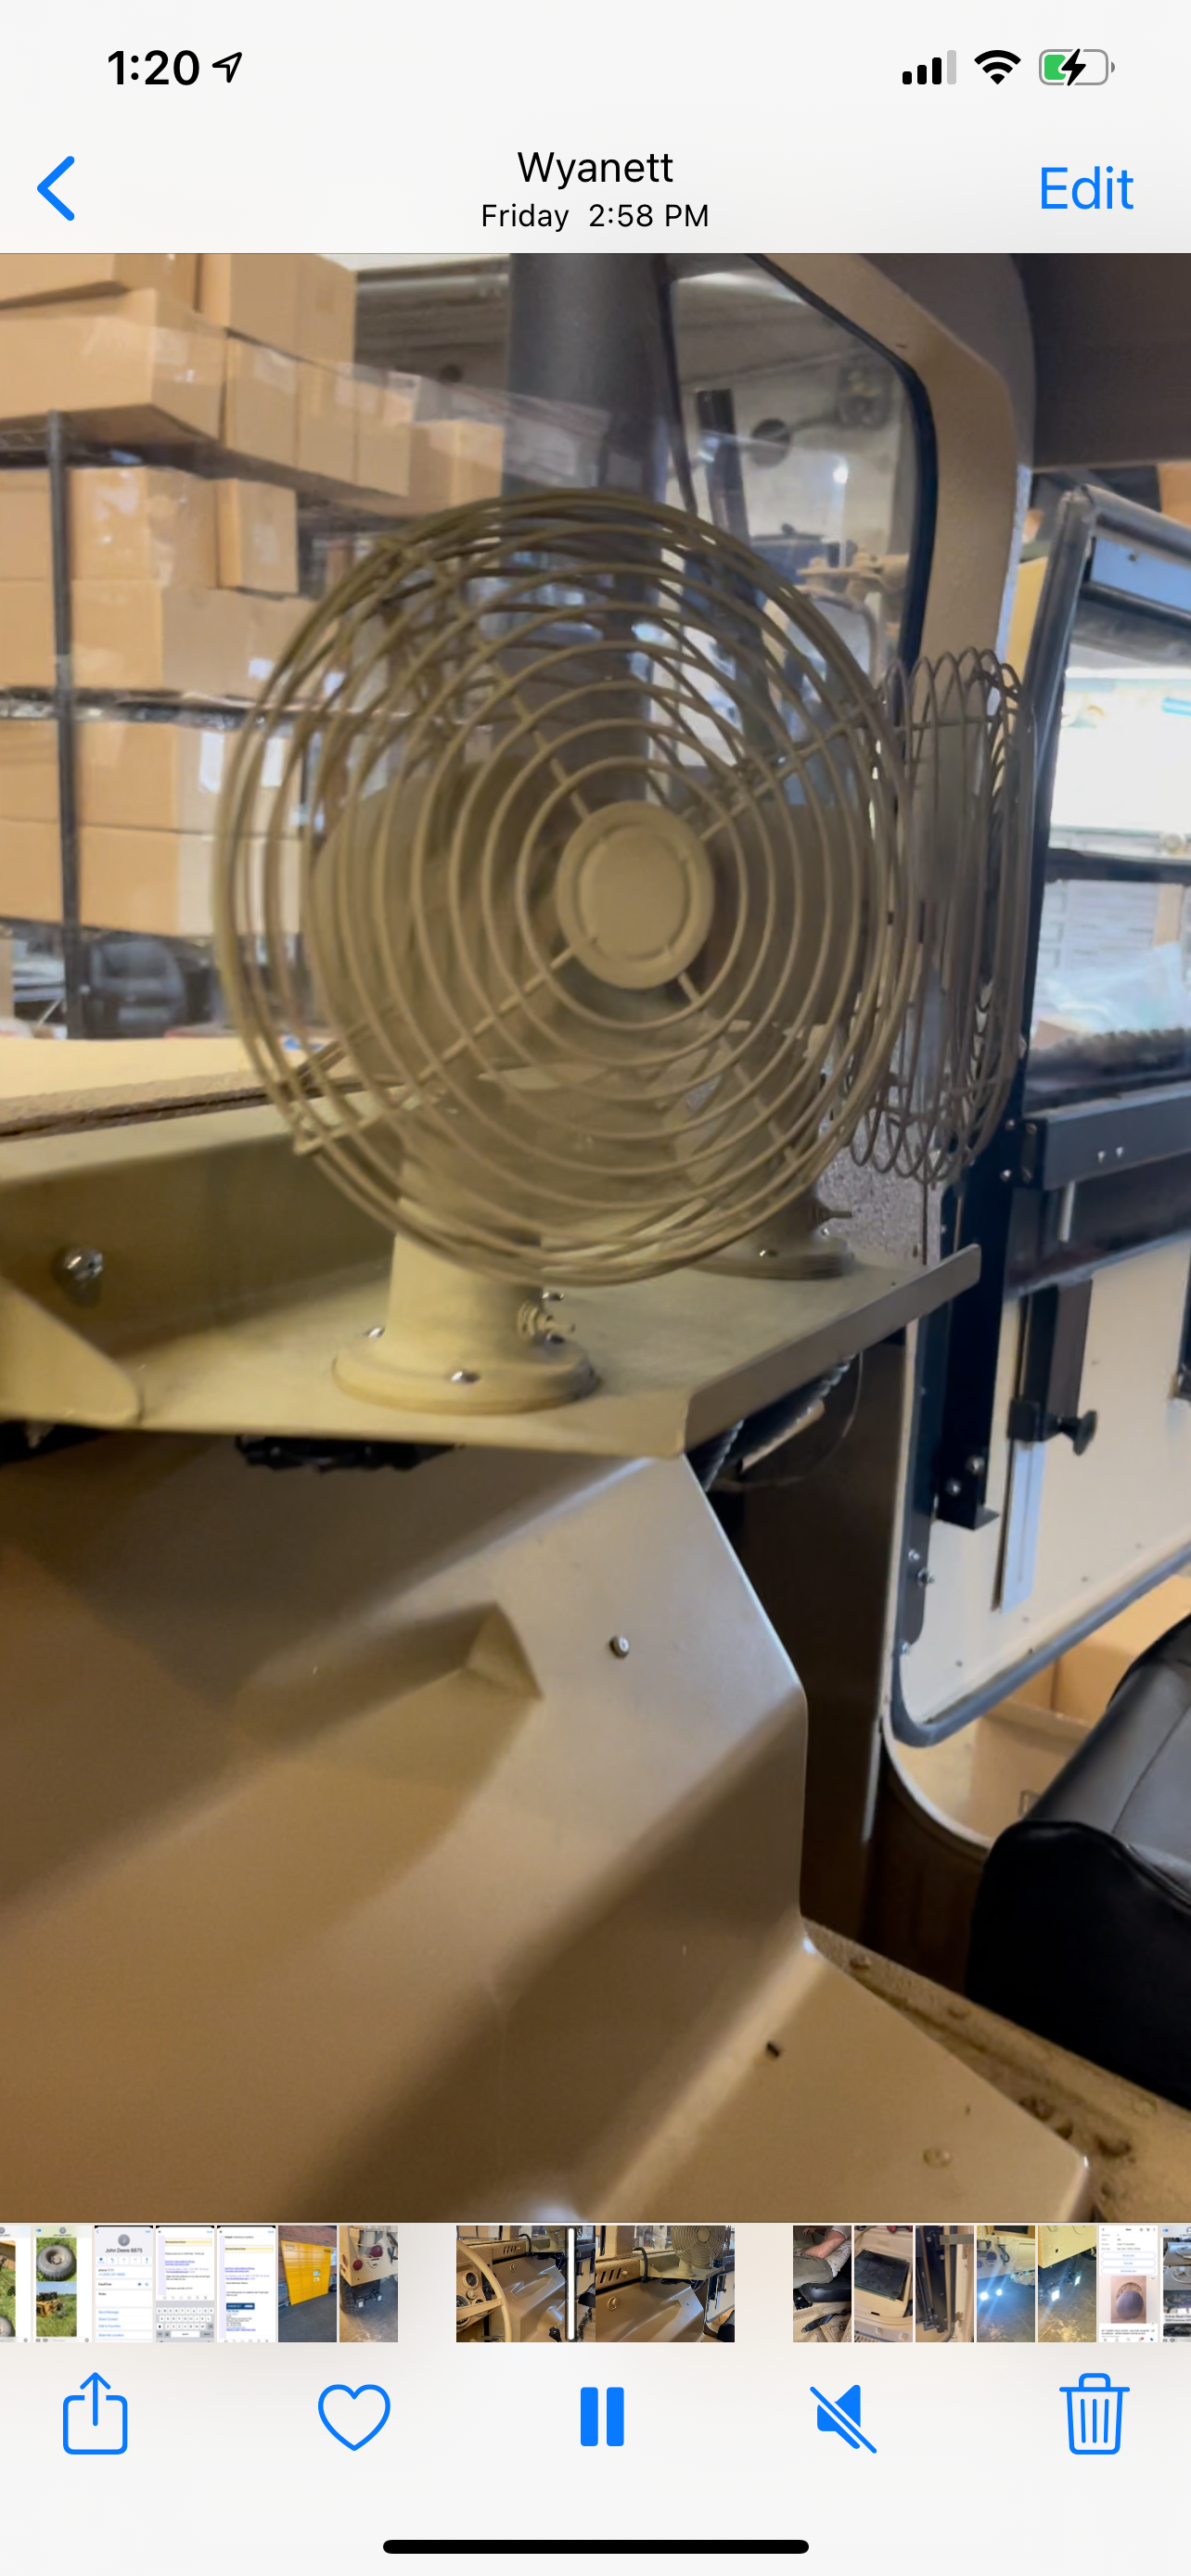 Dual dash Fan kit includes Mounting Tray